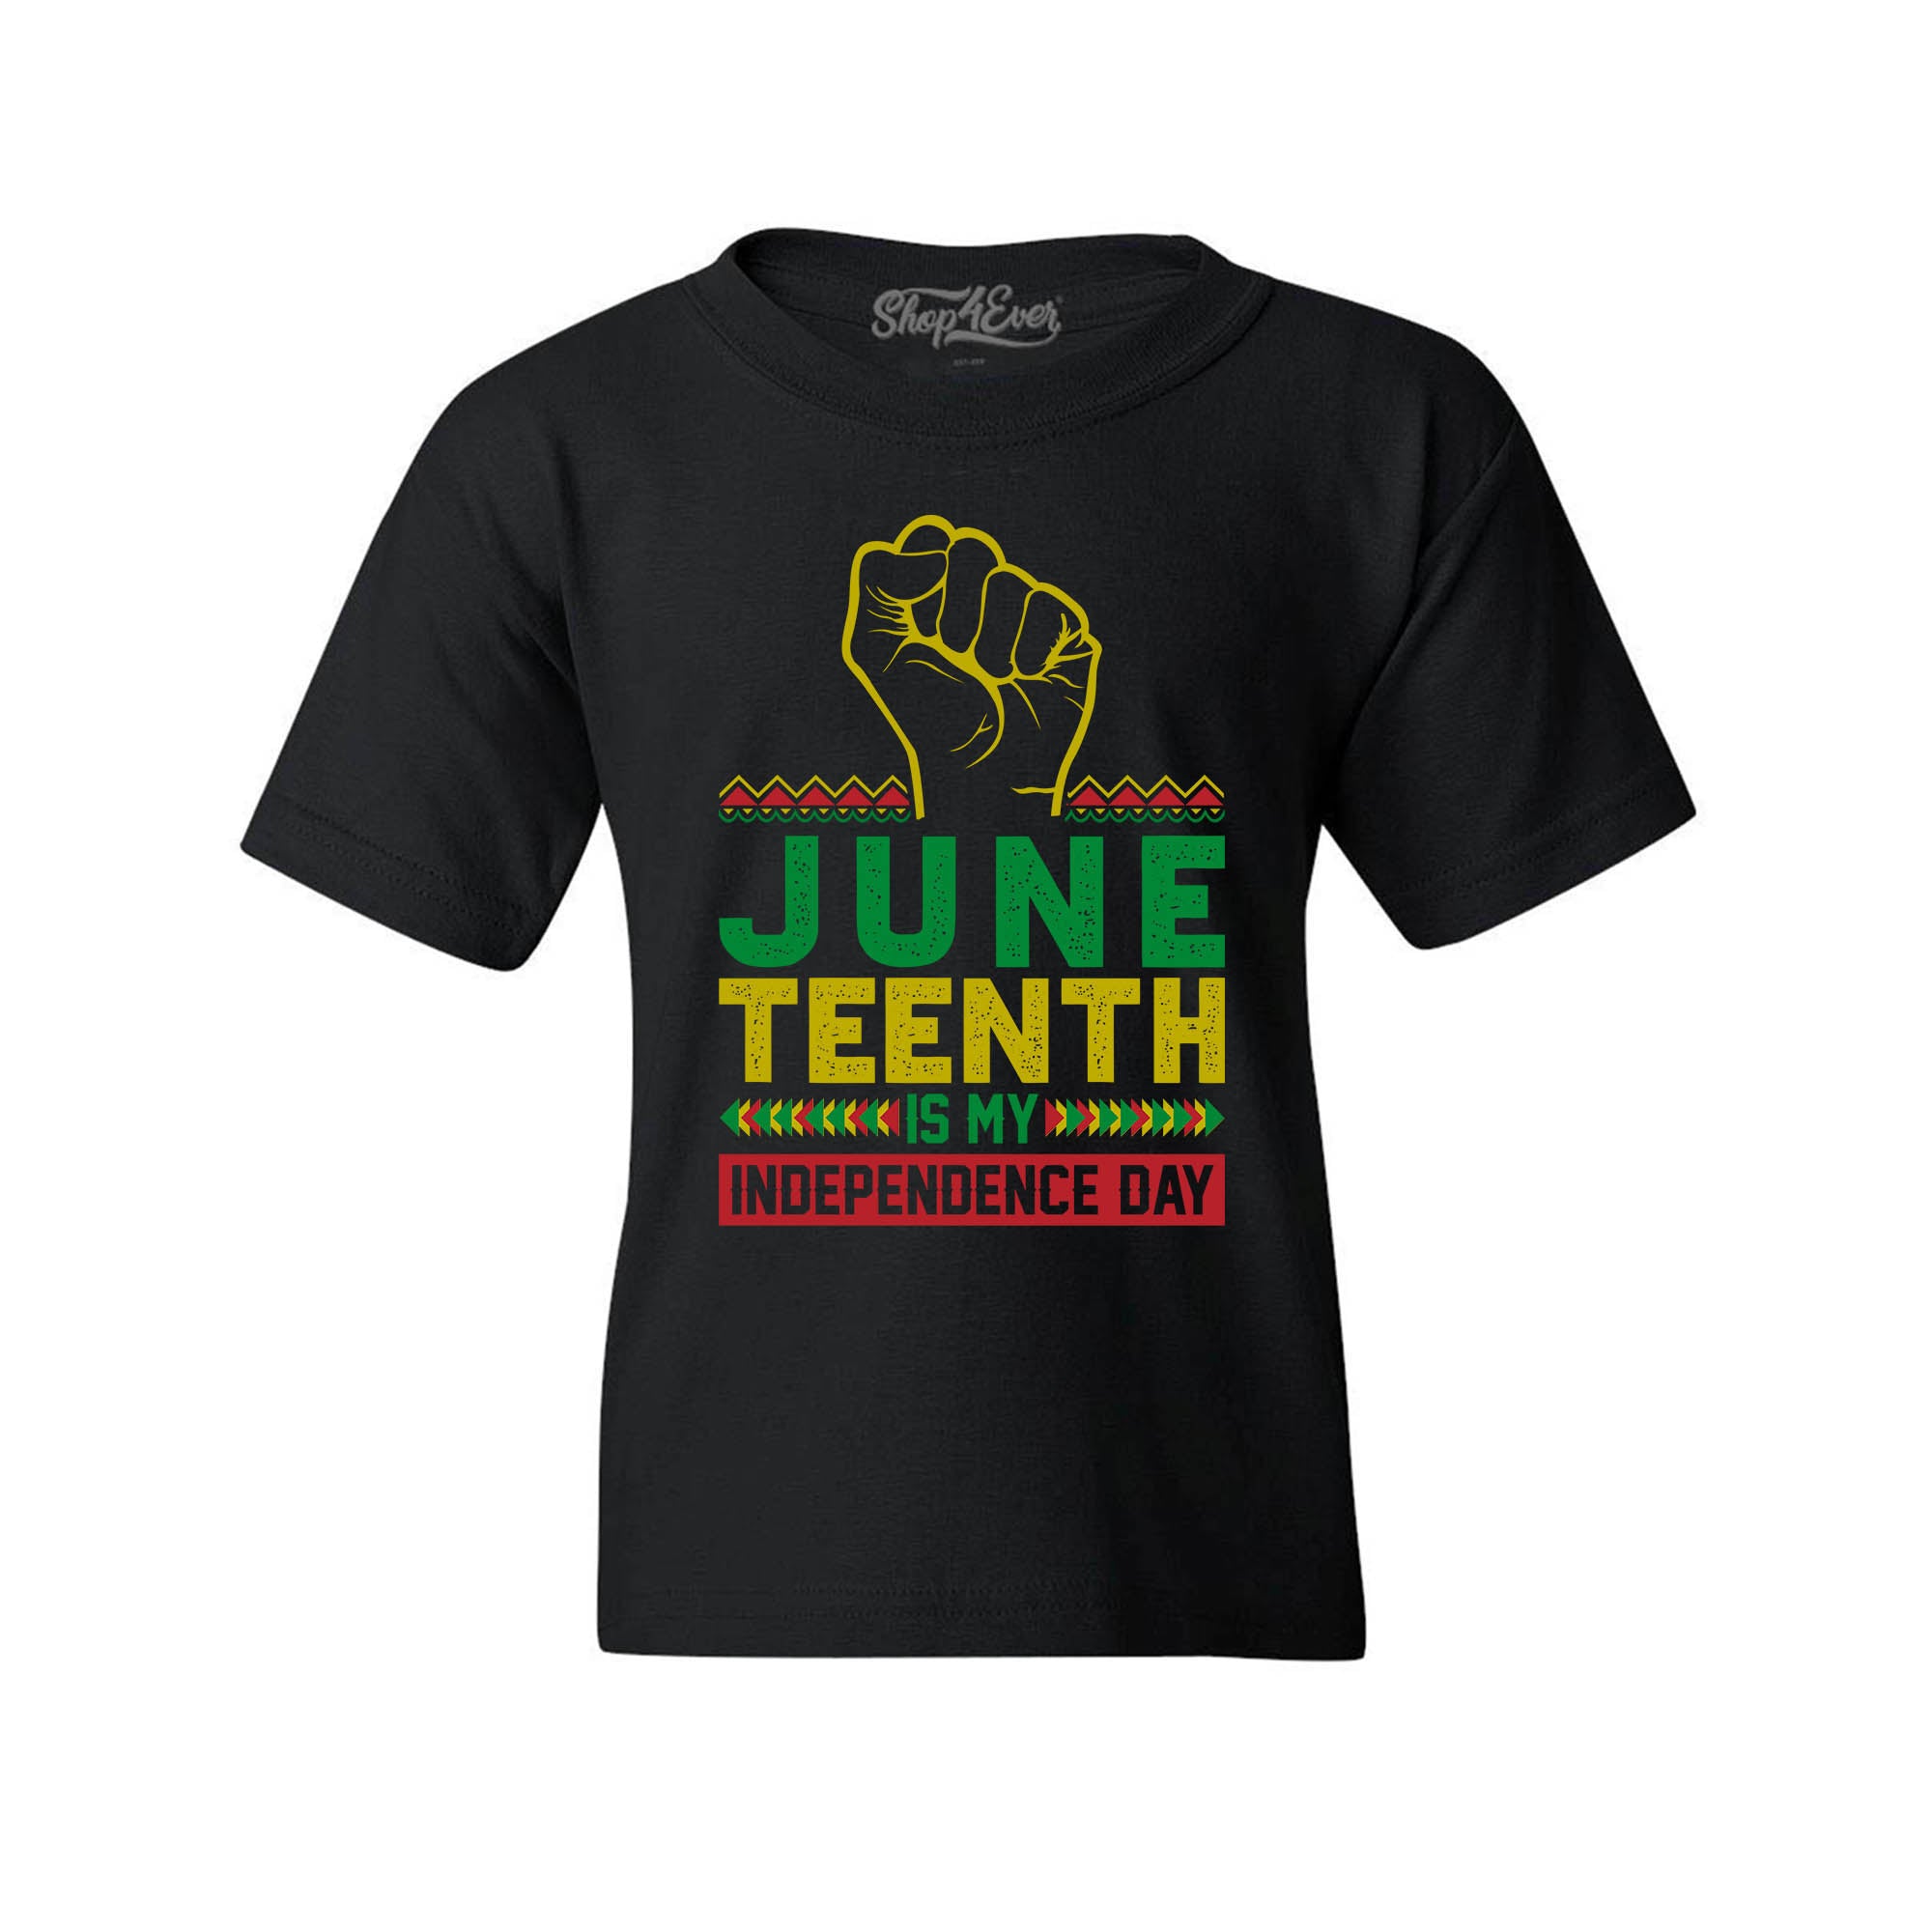 Juneteenth is My Independence Day June 19th 1865 Child's T-Shirt Kids Tee